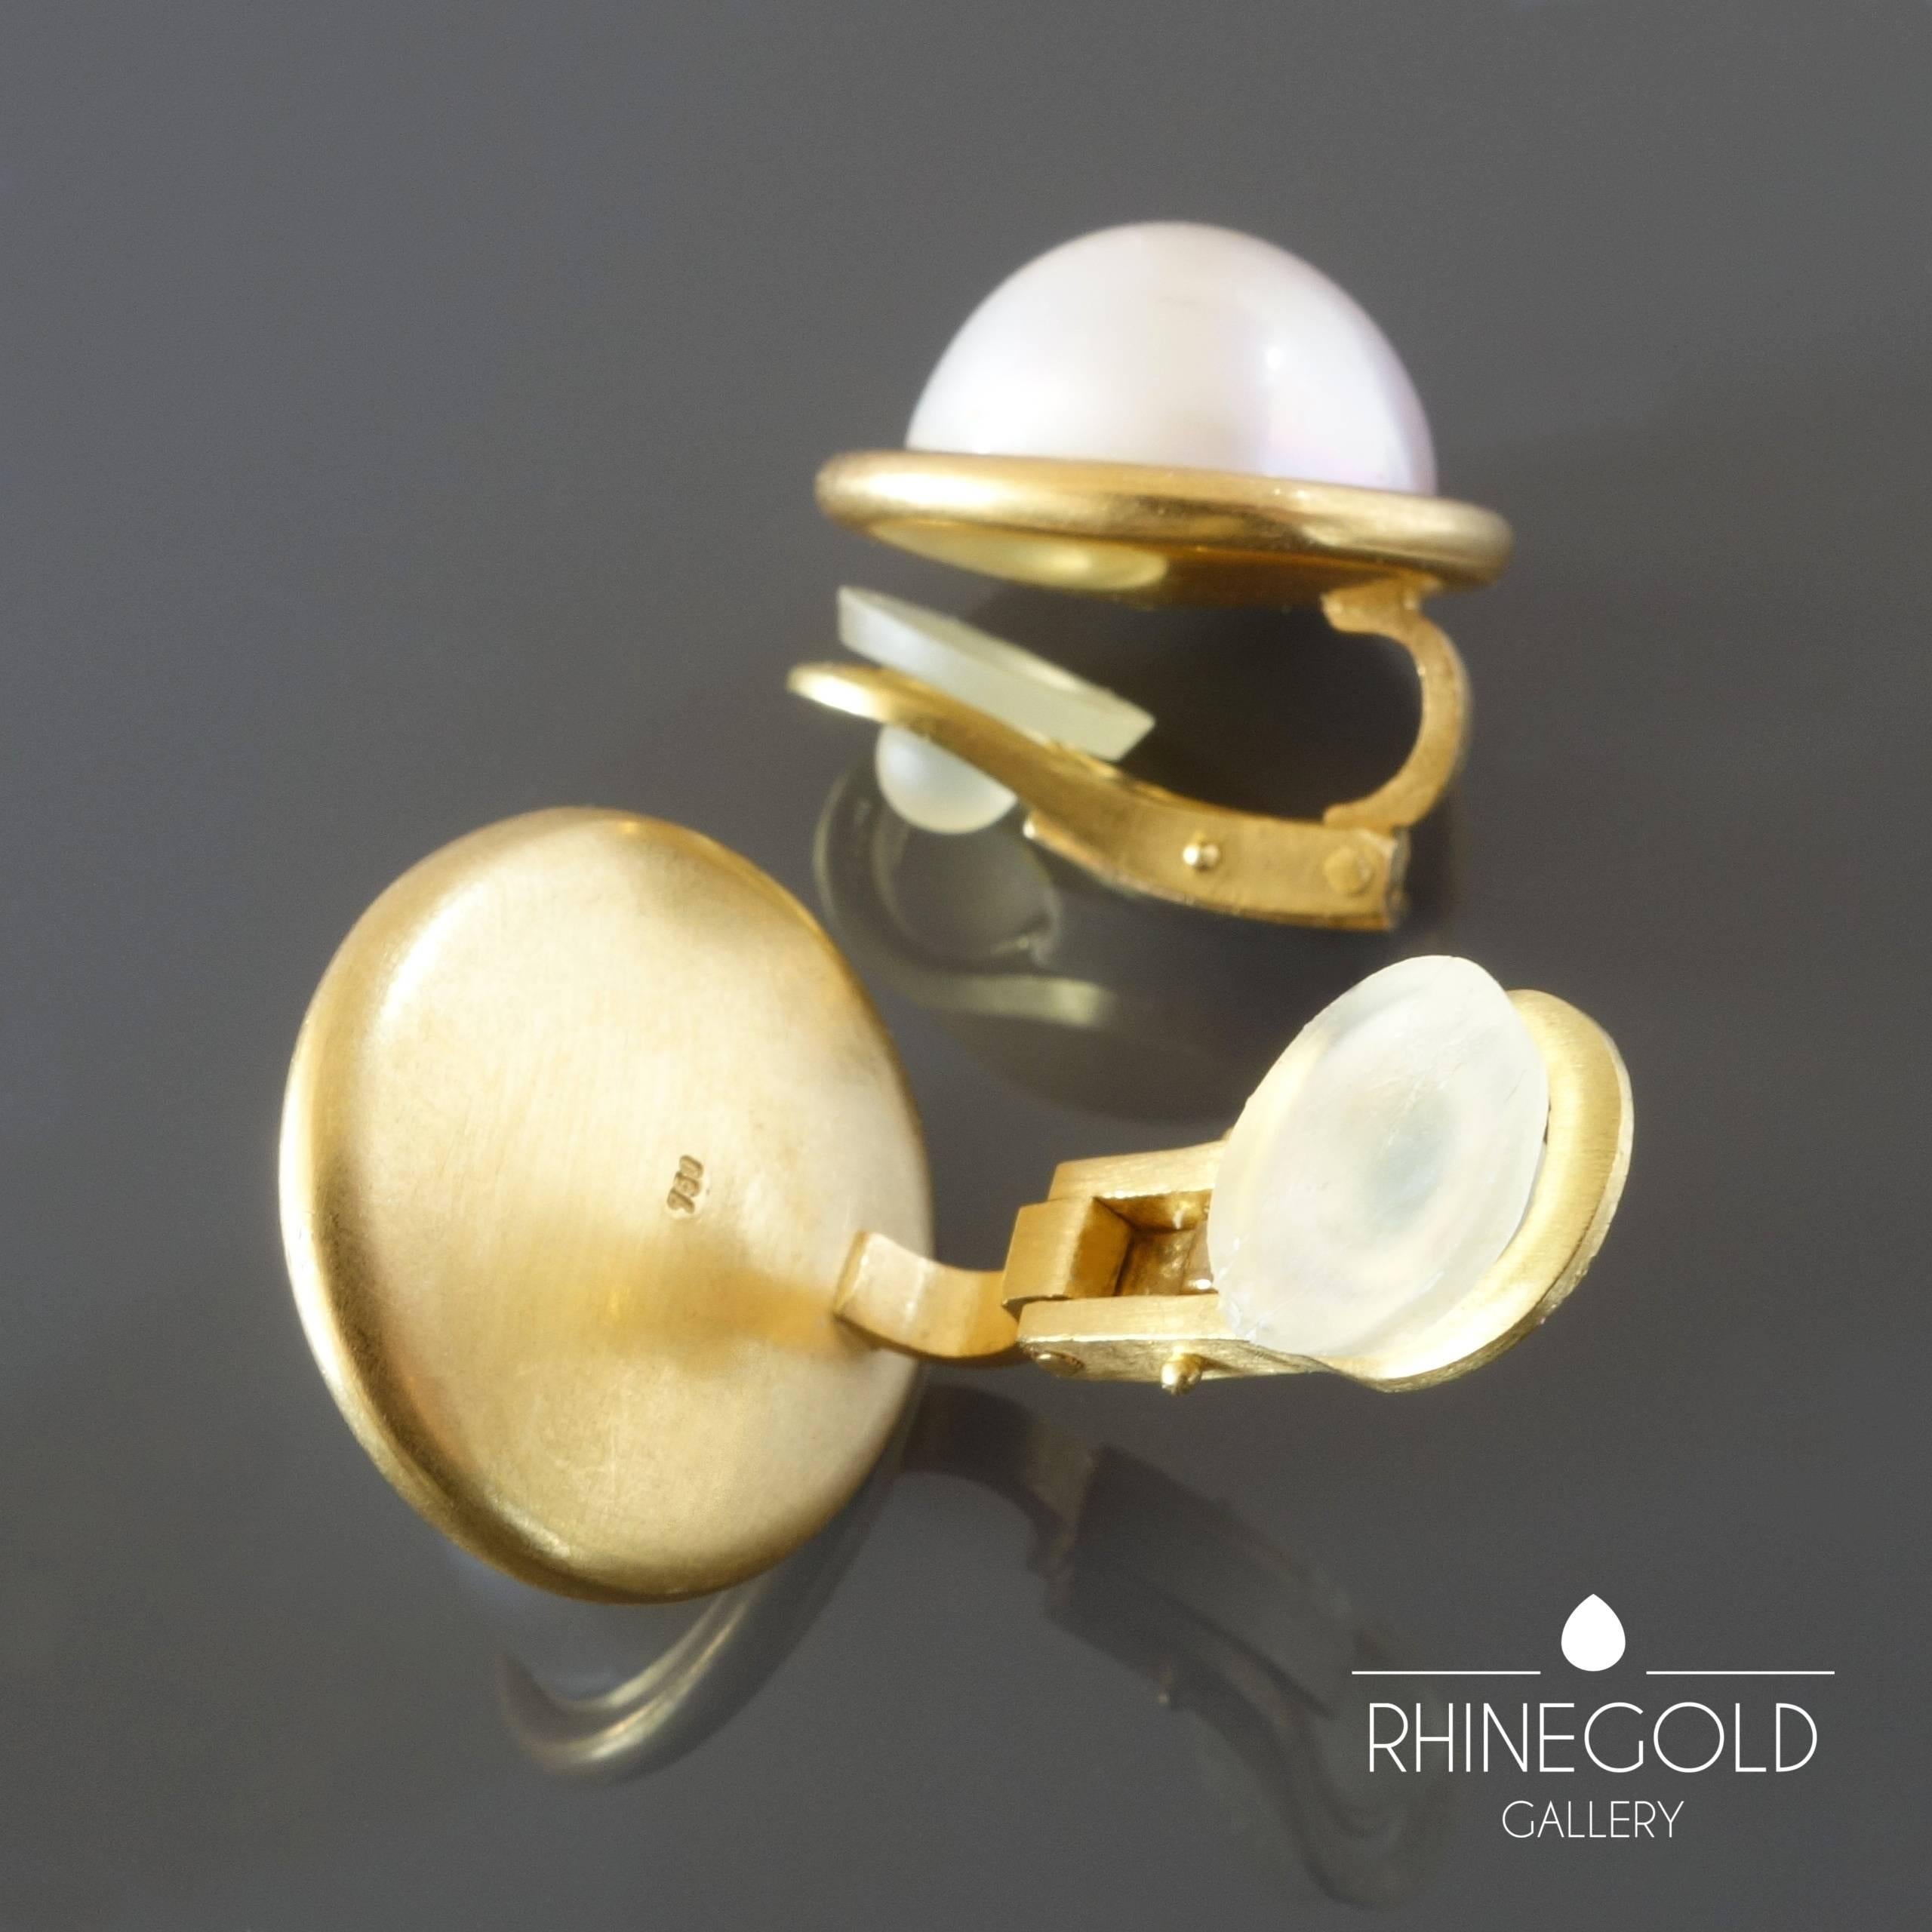 Modern Mabe Pearl Matte Gold Clip-on Earrings
18k yellow gold, mabe pearls
Diameter 1.9 cm (approx. 3/4“)
Weight approx. 19.1 grams
Marks: gold content mark ‘750’ for 18k gold
Germany, 1990s – 2000s 

A classical pair of mabe pearl earrings of a